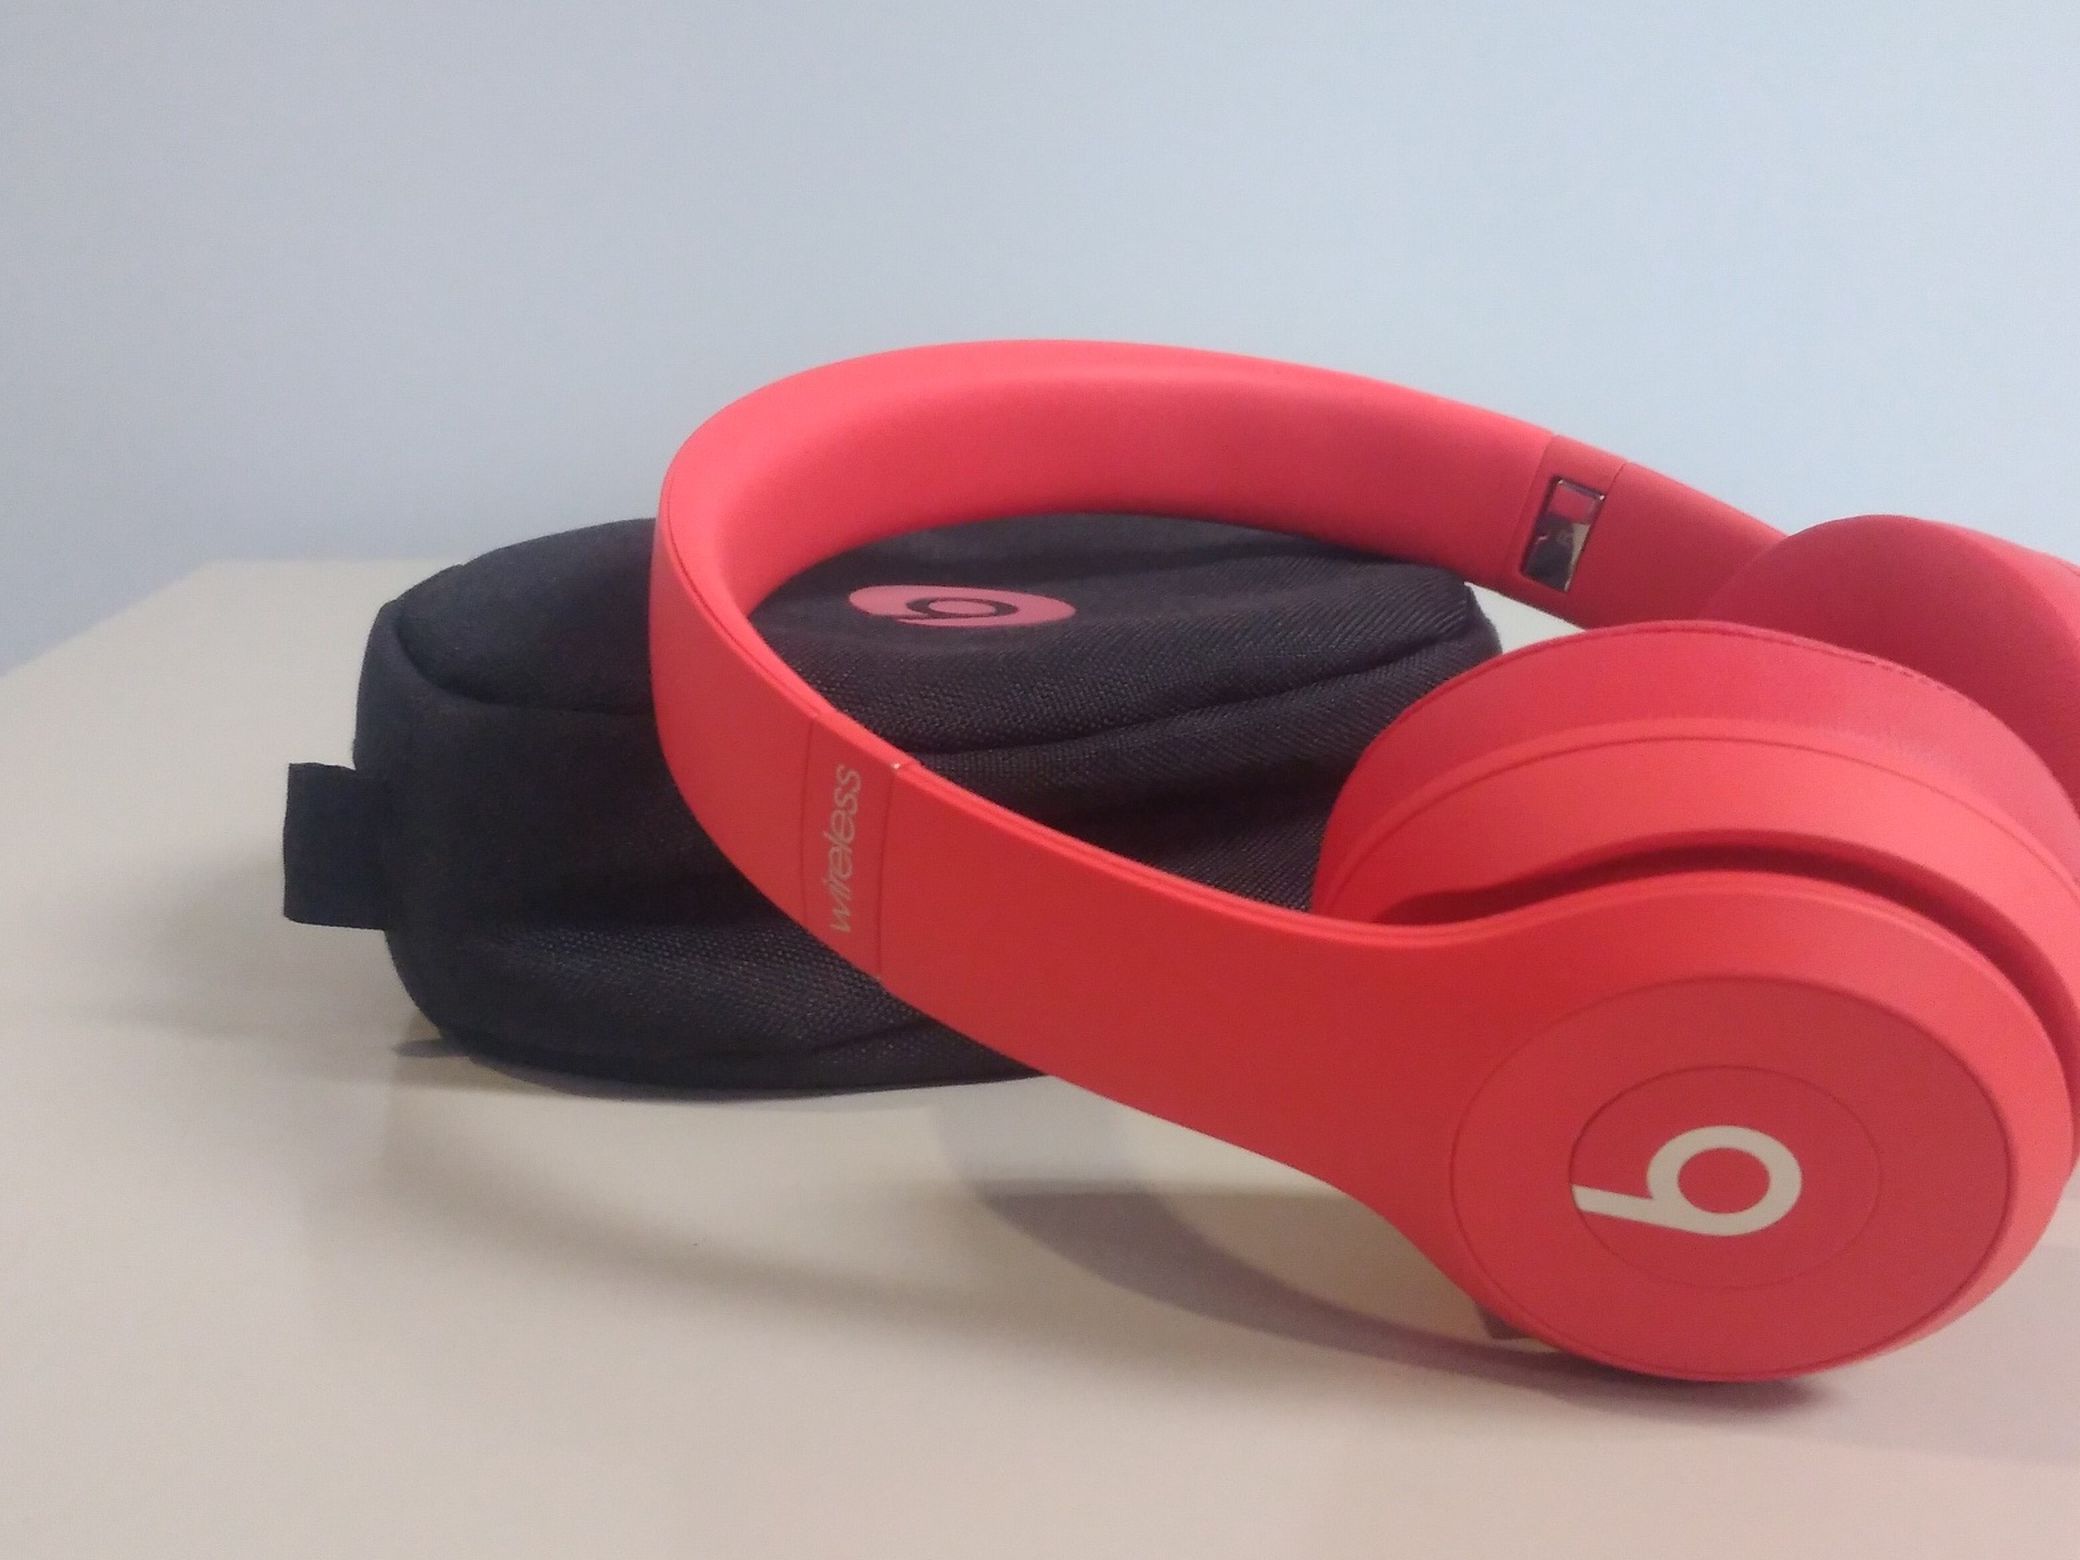 (Authentic) Red Beats Solo 3 Wireless Headphones for Sale in Orlando, - OfferUp